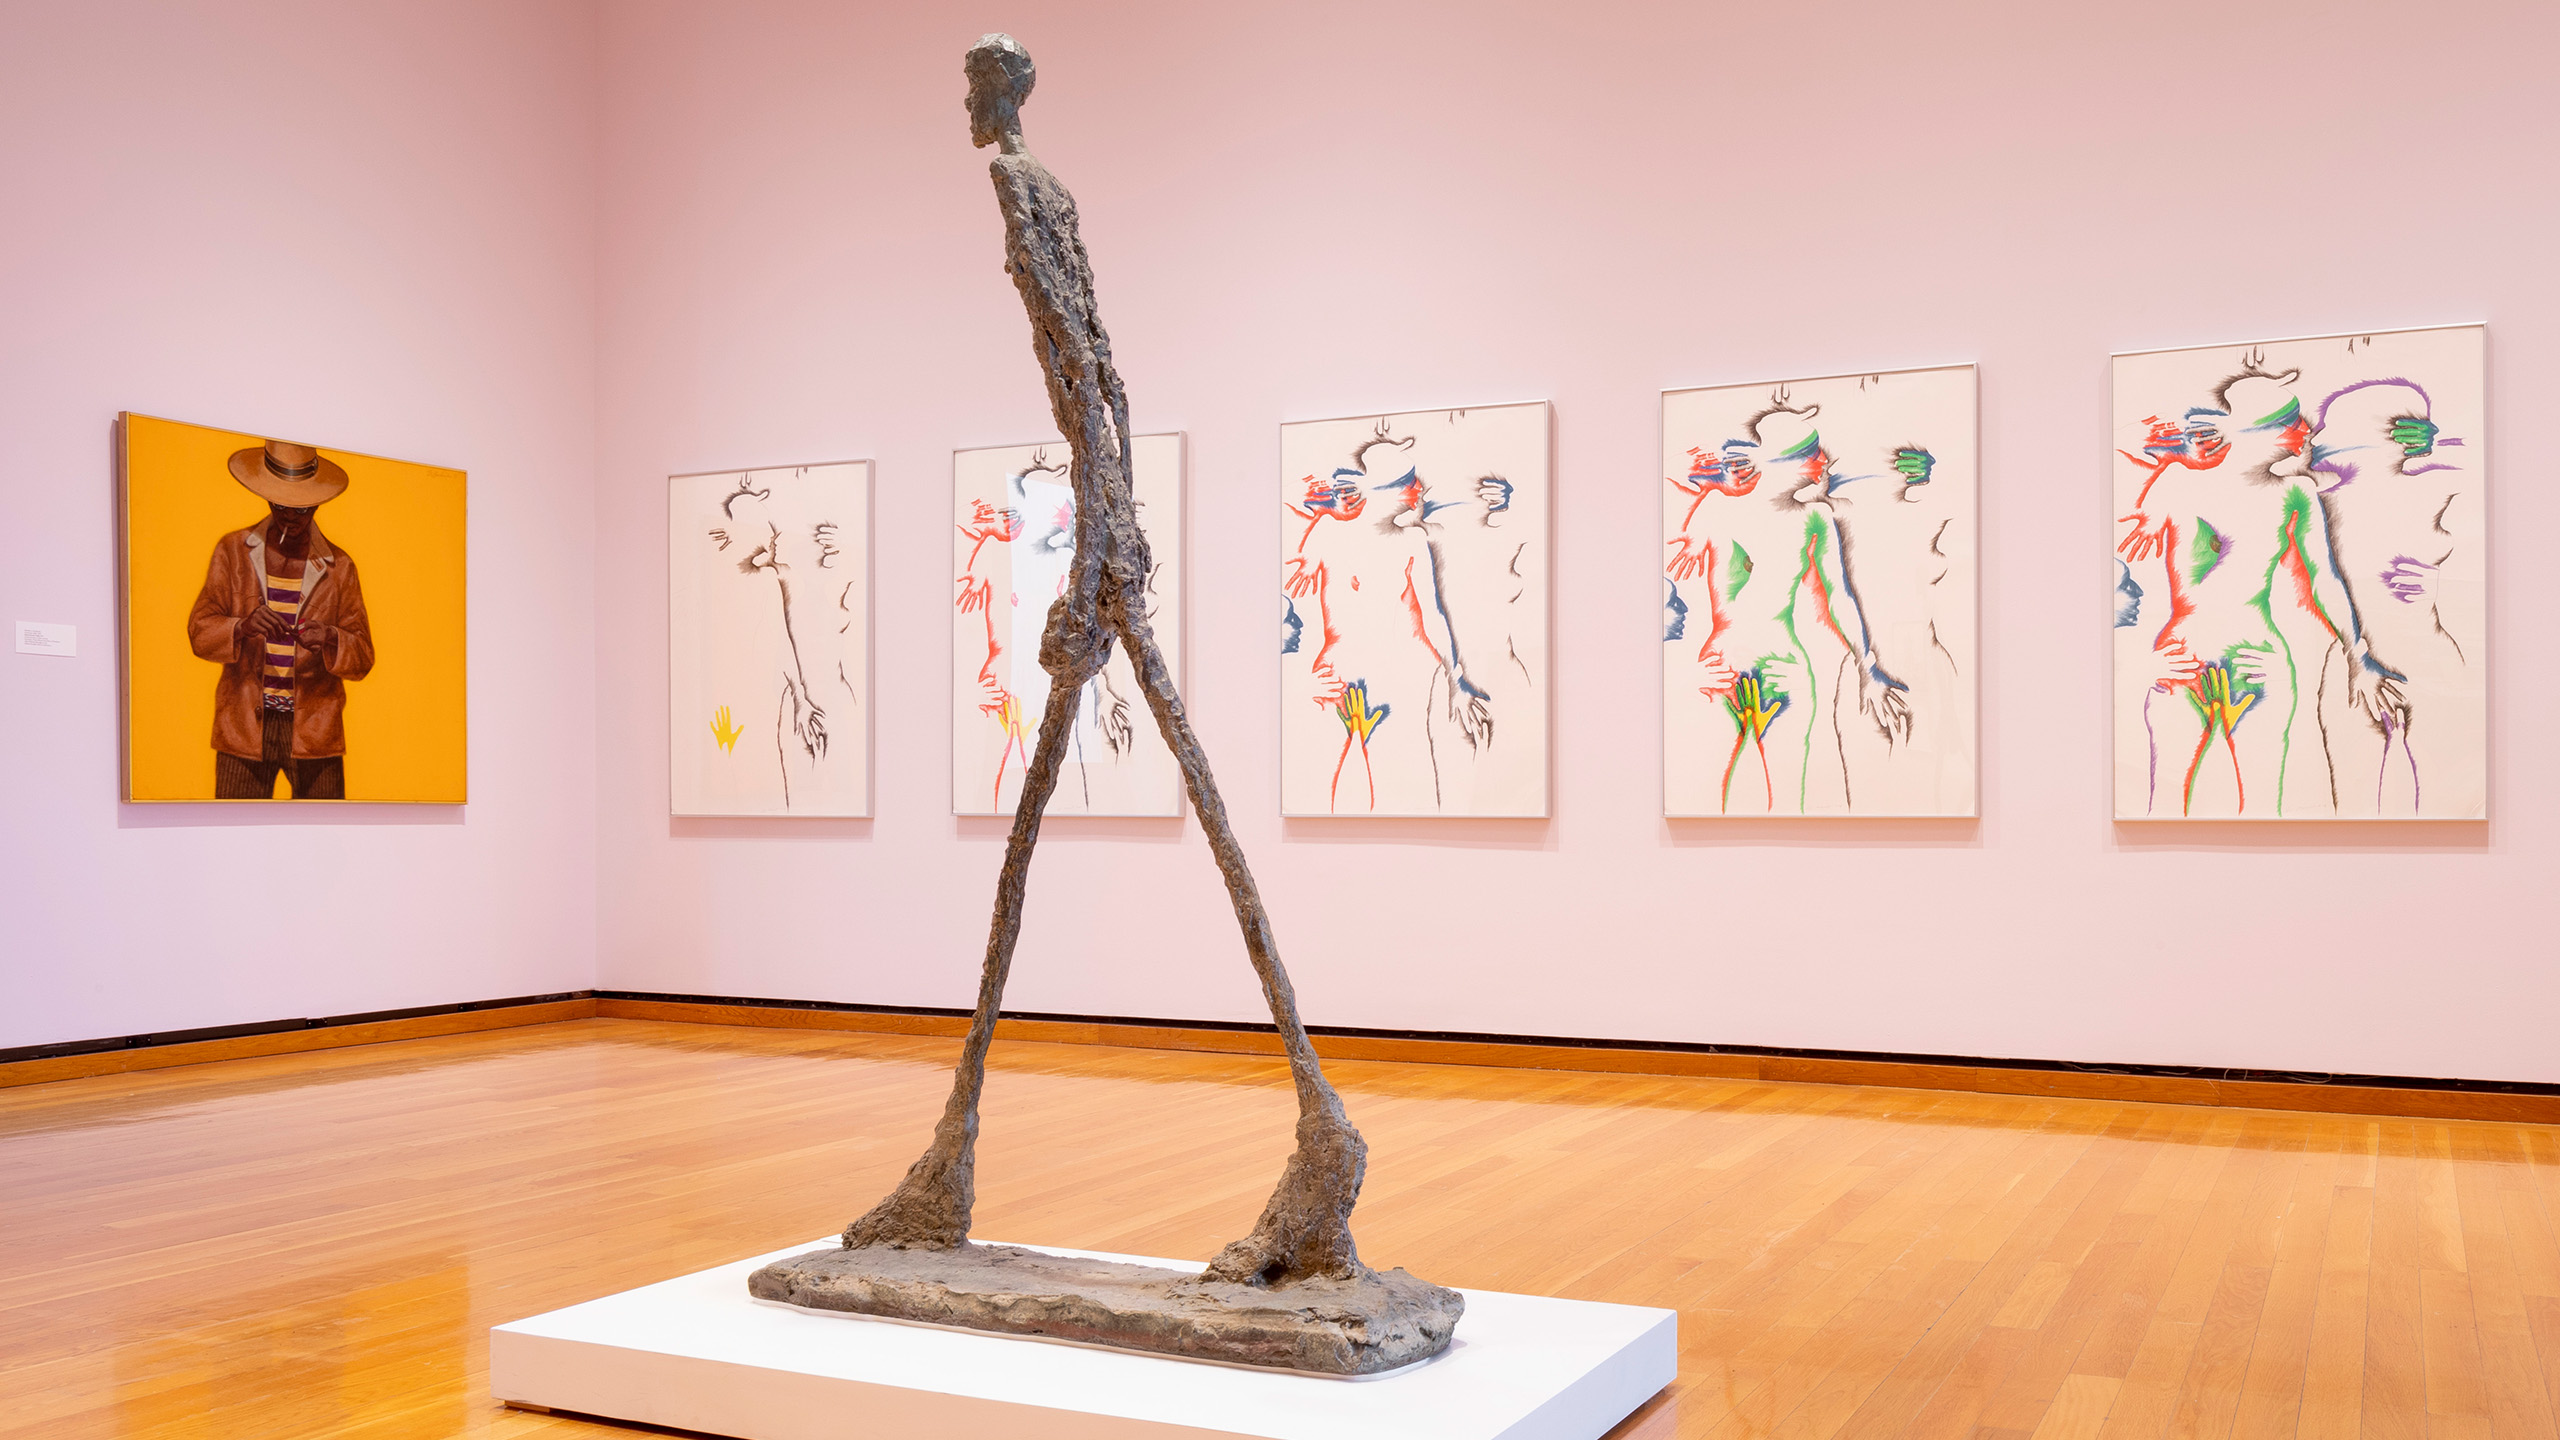 A tall figural statue in a gallery with colorful framed artworks on the walls